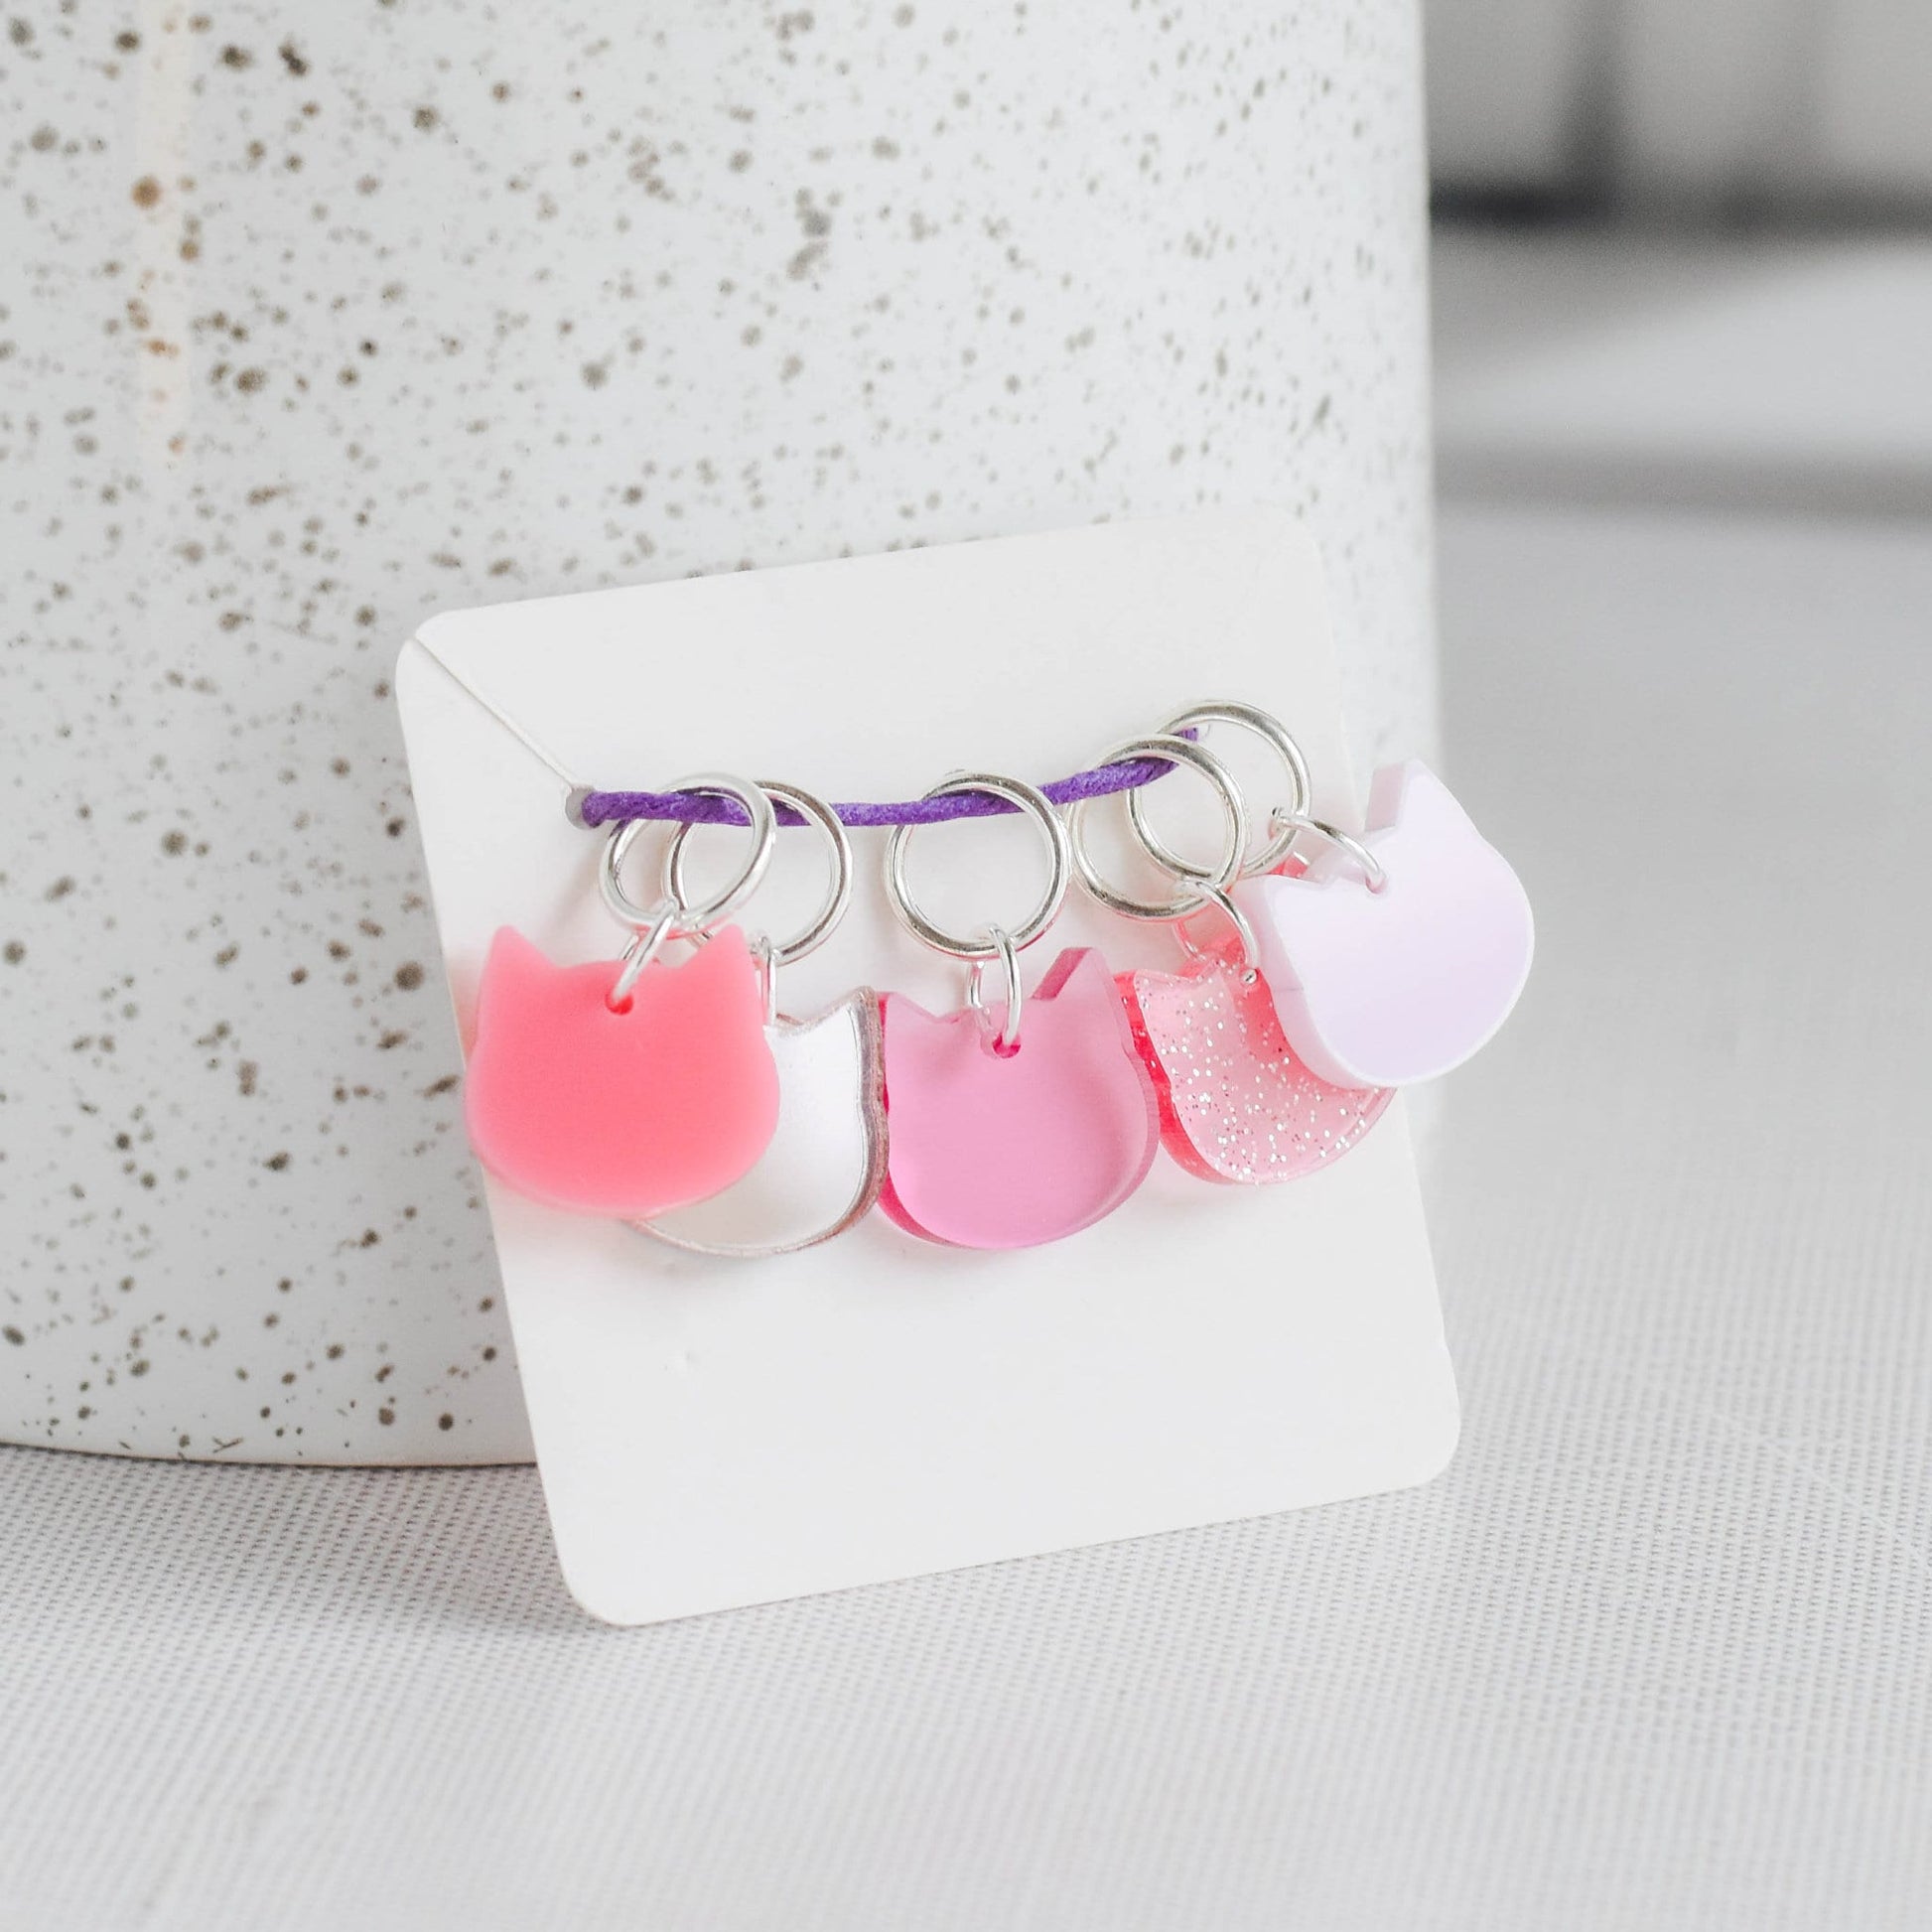 Set of 5 Cat Stitch Markers - Pinks - Cat Markers, Laser Engraved Acrylic Stitch Markers, Pink Mirror Glitter Acrylic Stitch Markers